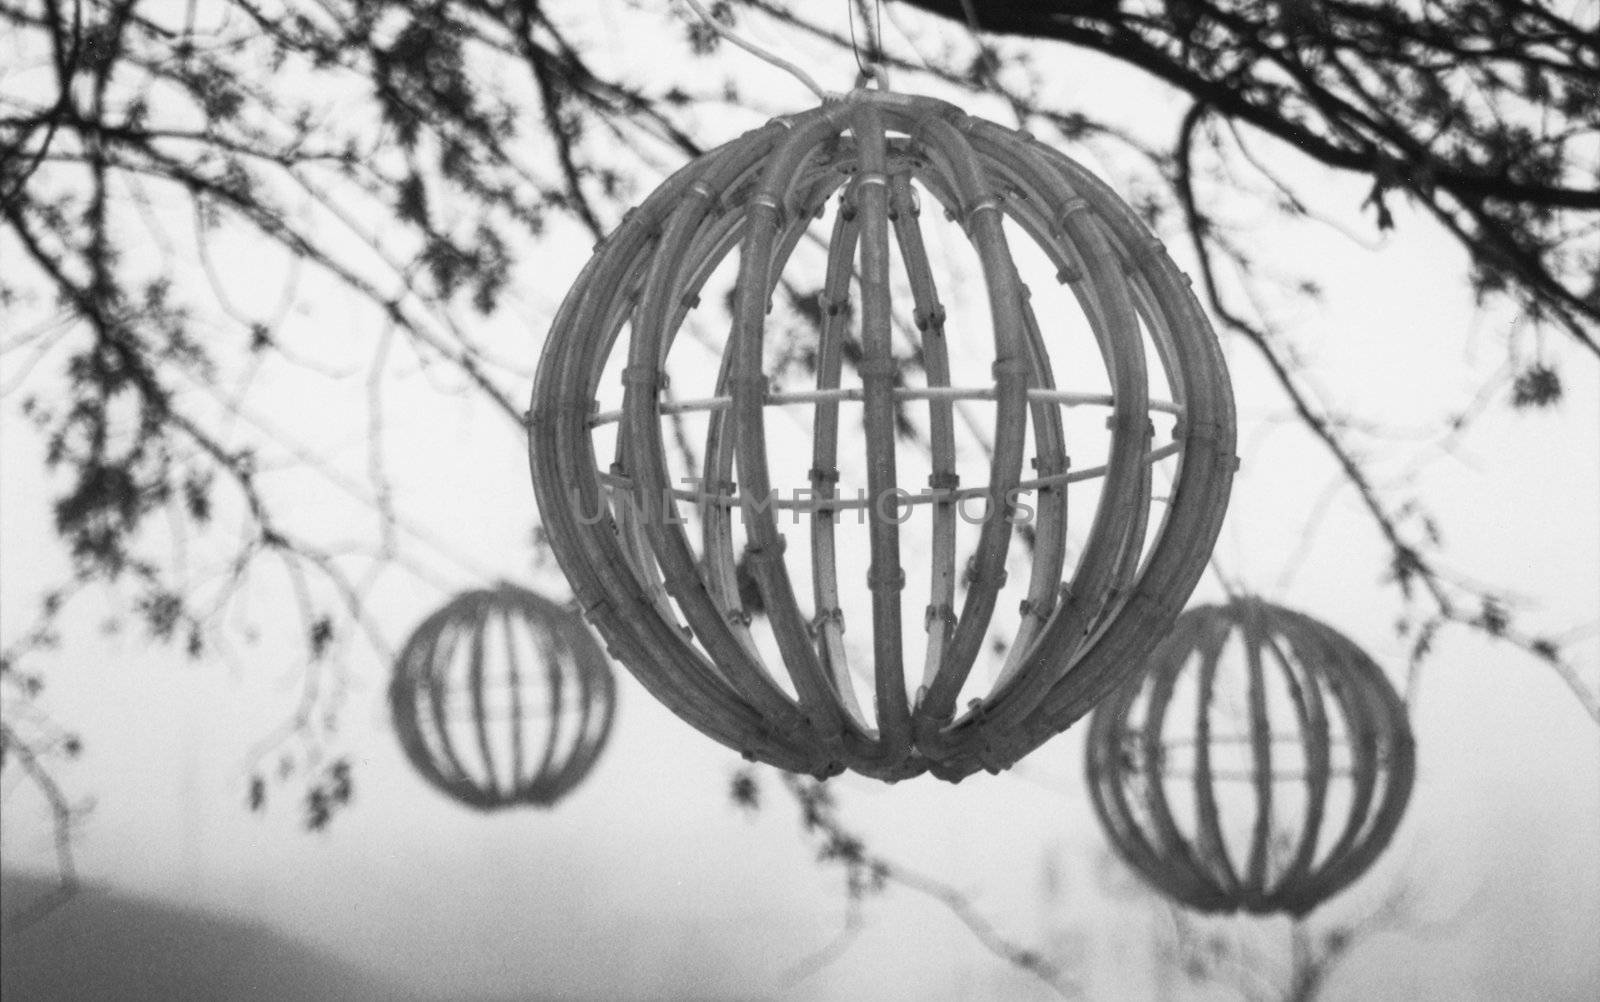 Wooden globes hanging from trees in city park